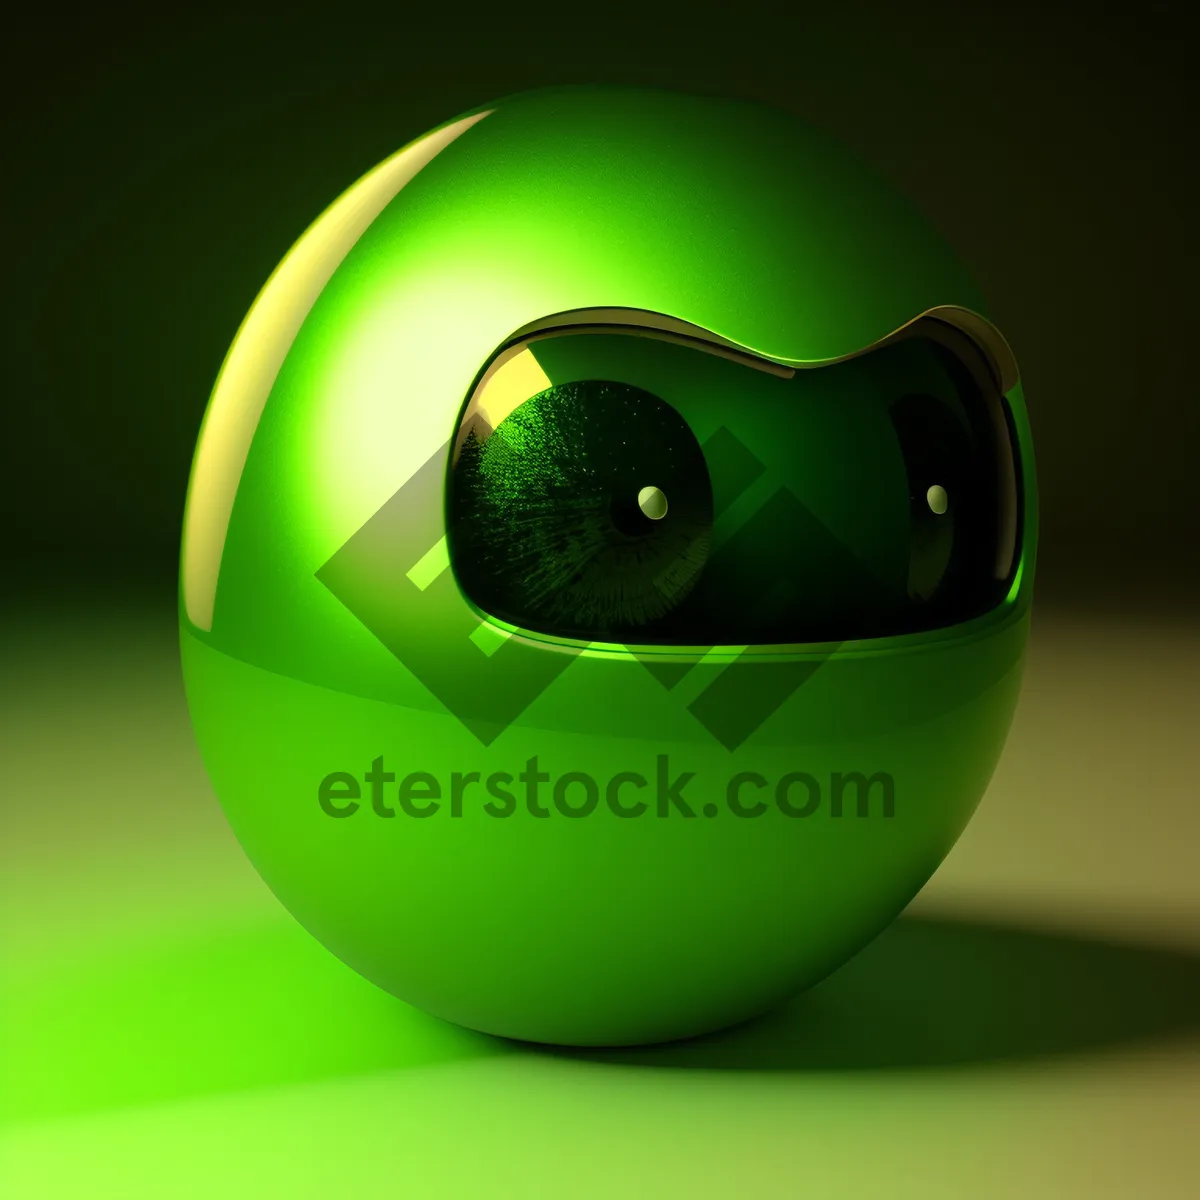 Picture of Shiny Glass Sphere Icon: Reflective Round Web Graphic.